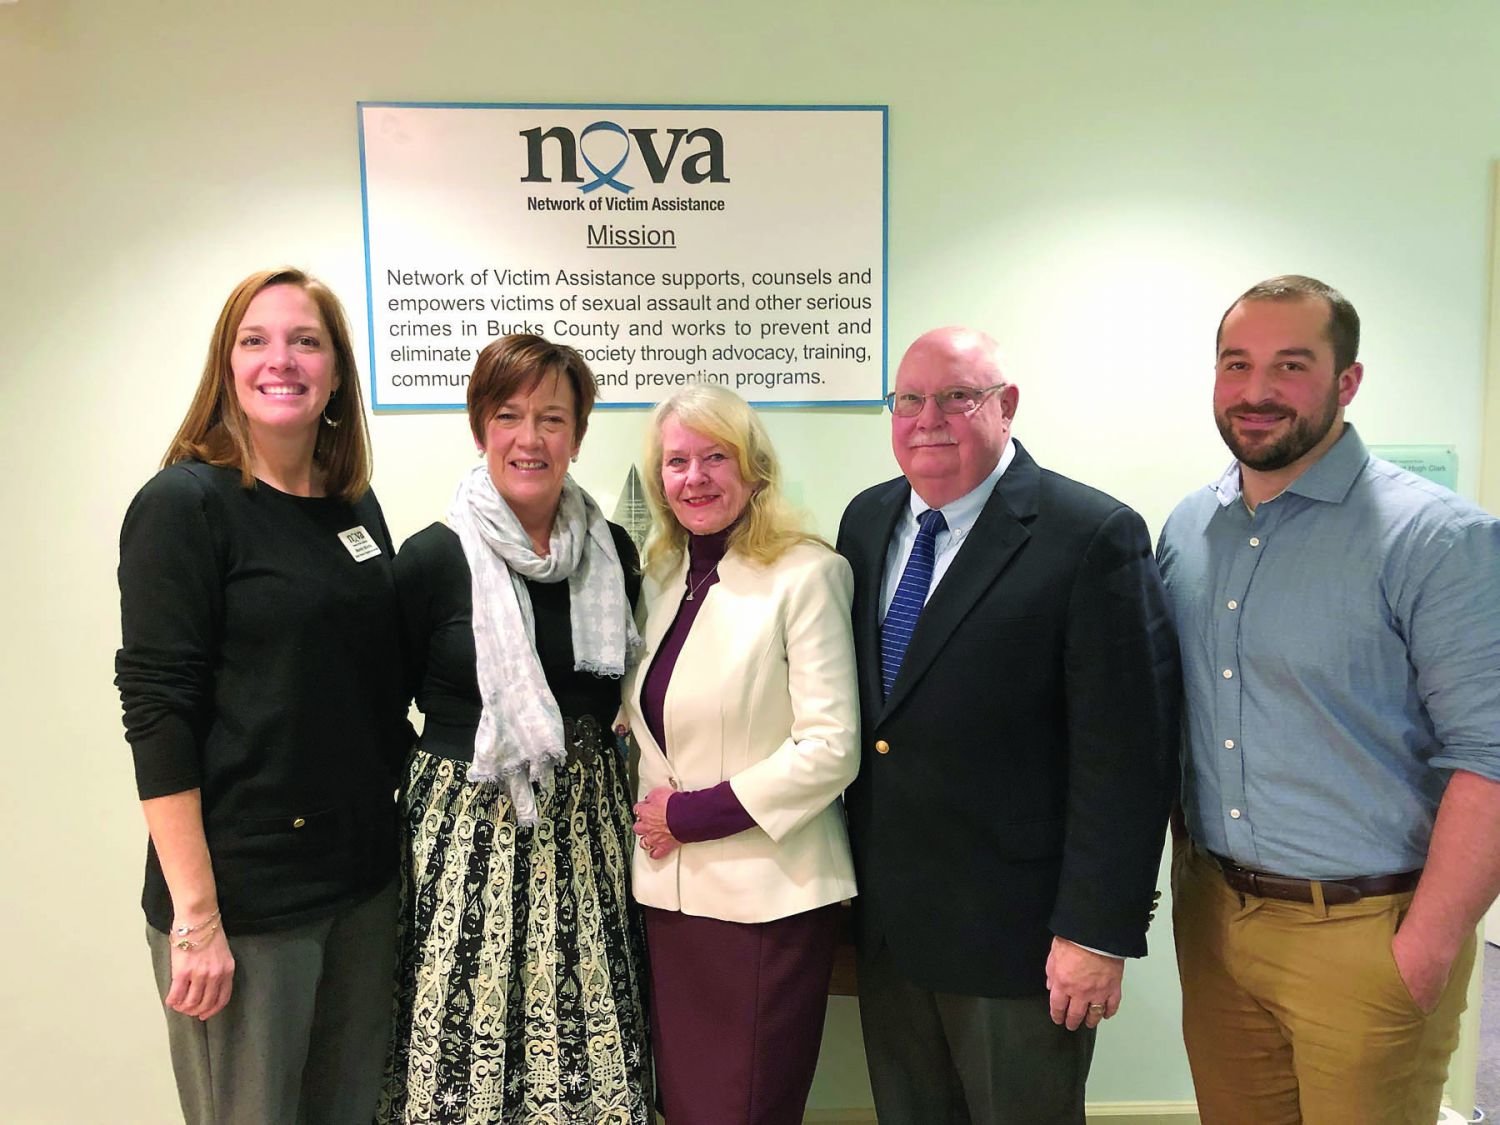 Network of Victim Assistance (NOVA), an organization that assists victims of sexual assault and other serious crimes in Bucks County, was the recipient of a grant from the Robert and Elaine Fitt Family Fund of the Philadelphia Foundation. The grant was presented at NOVA’s headquarters in Jamison. From left are: Mandy Mundy, senior director of programs and services; Penny Ettinger, executive director; Elaine Fitt and Robert Fitt, and Steve Doerner, director of the Bucks County Children’s Advocacy Center. Photograph courtesy of NOVA.